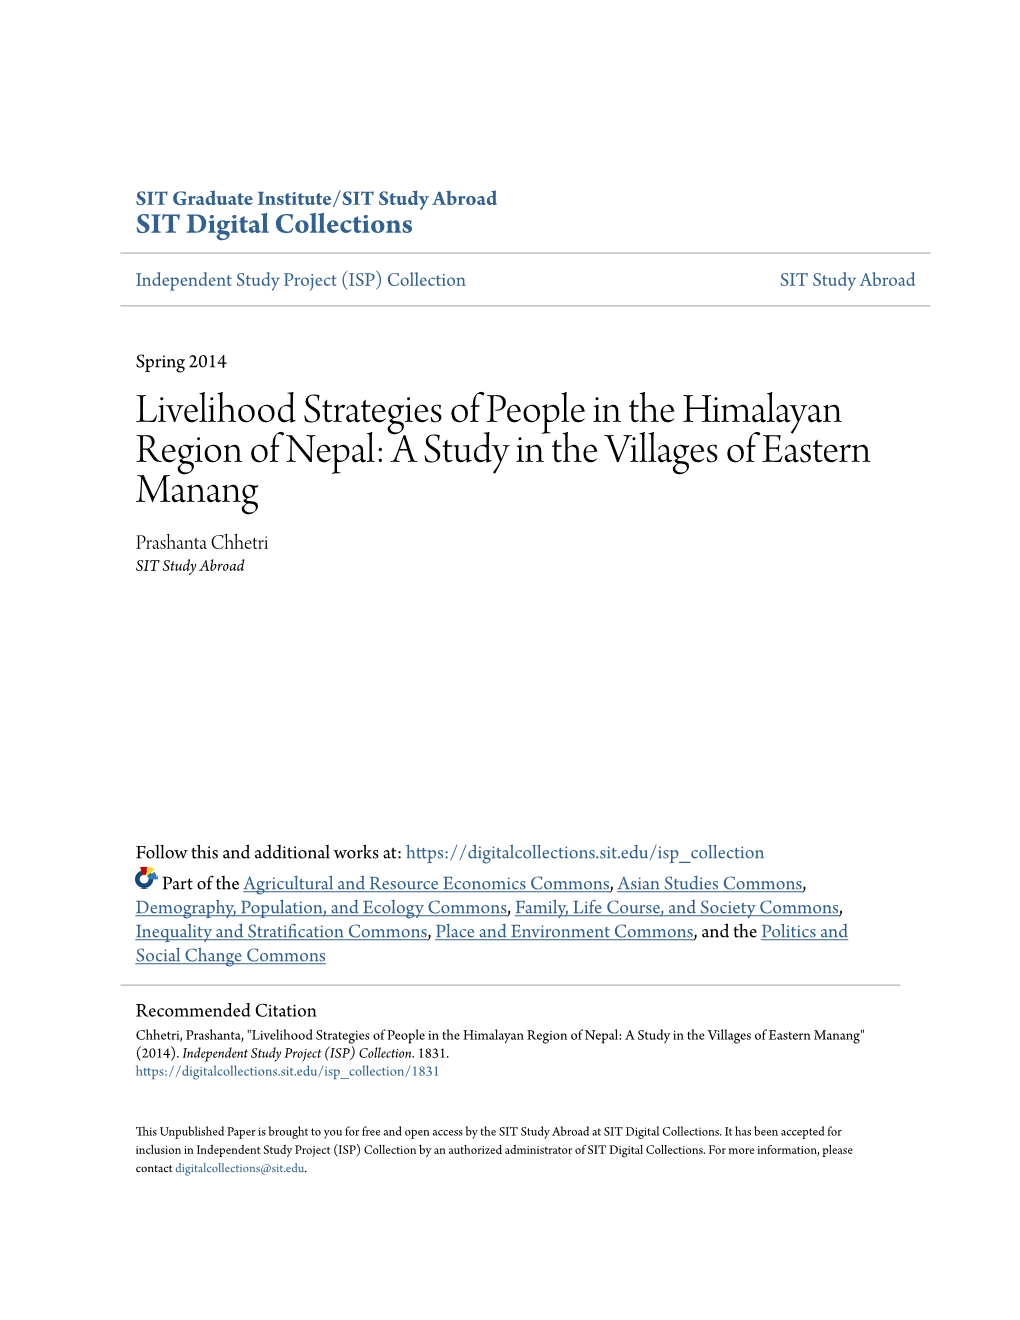 Livelihood Strategies of People in the Himalayan Region of Nepal: a Study in the Villages of Eastern Manang Prashanta Chhetri SIT Study Abroad